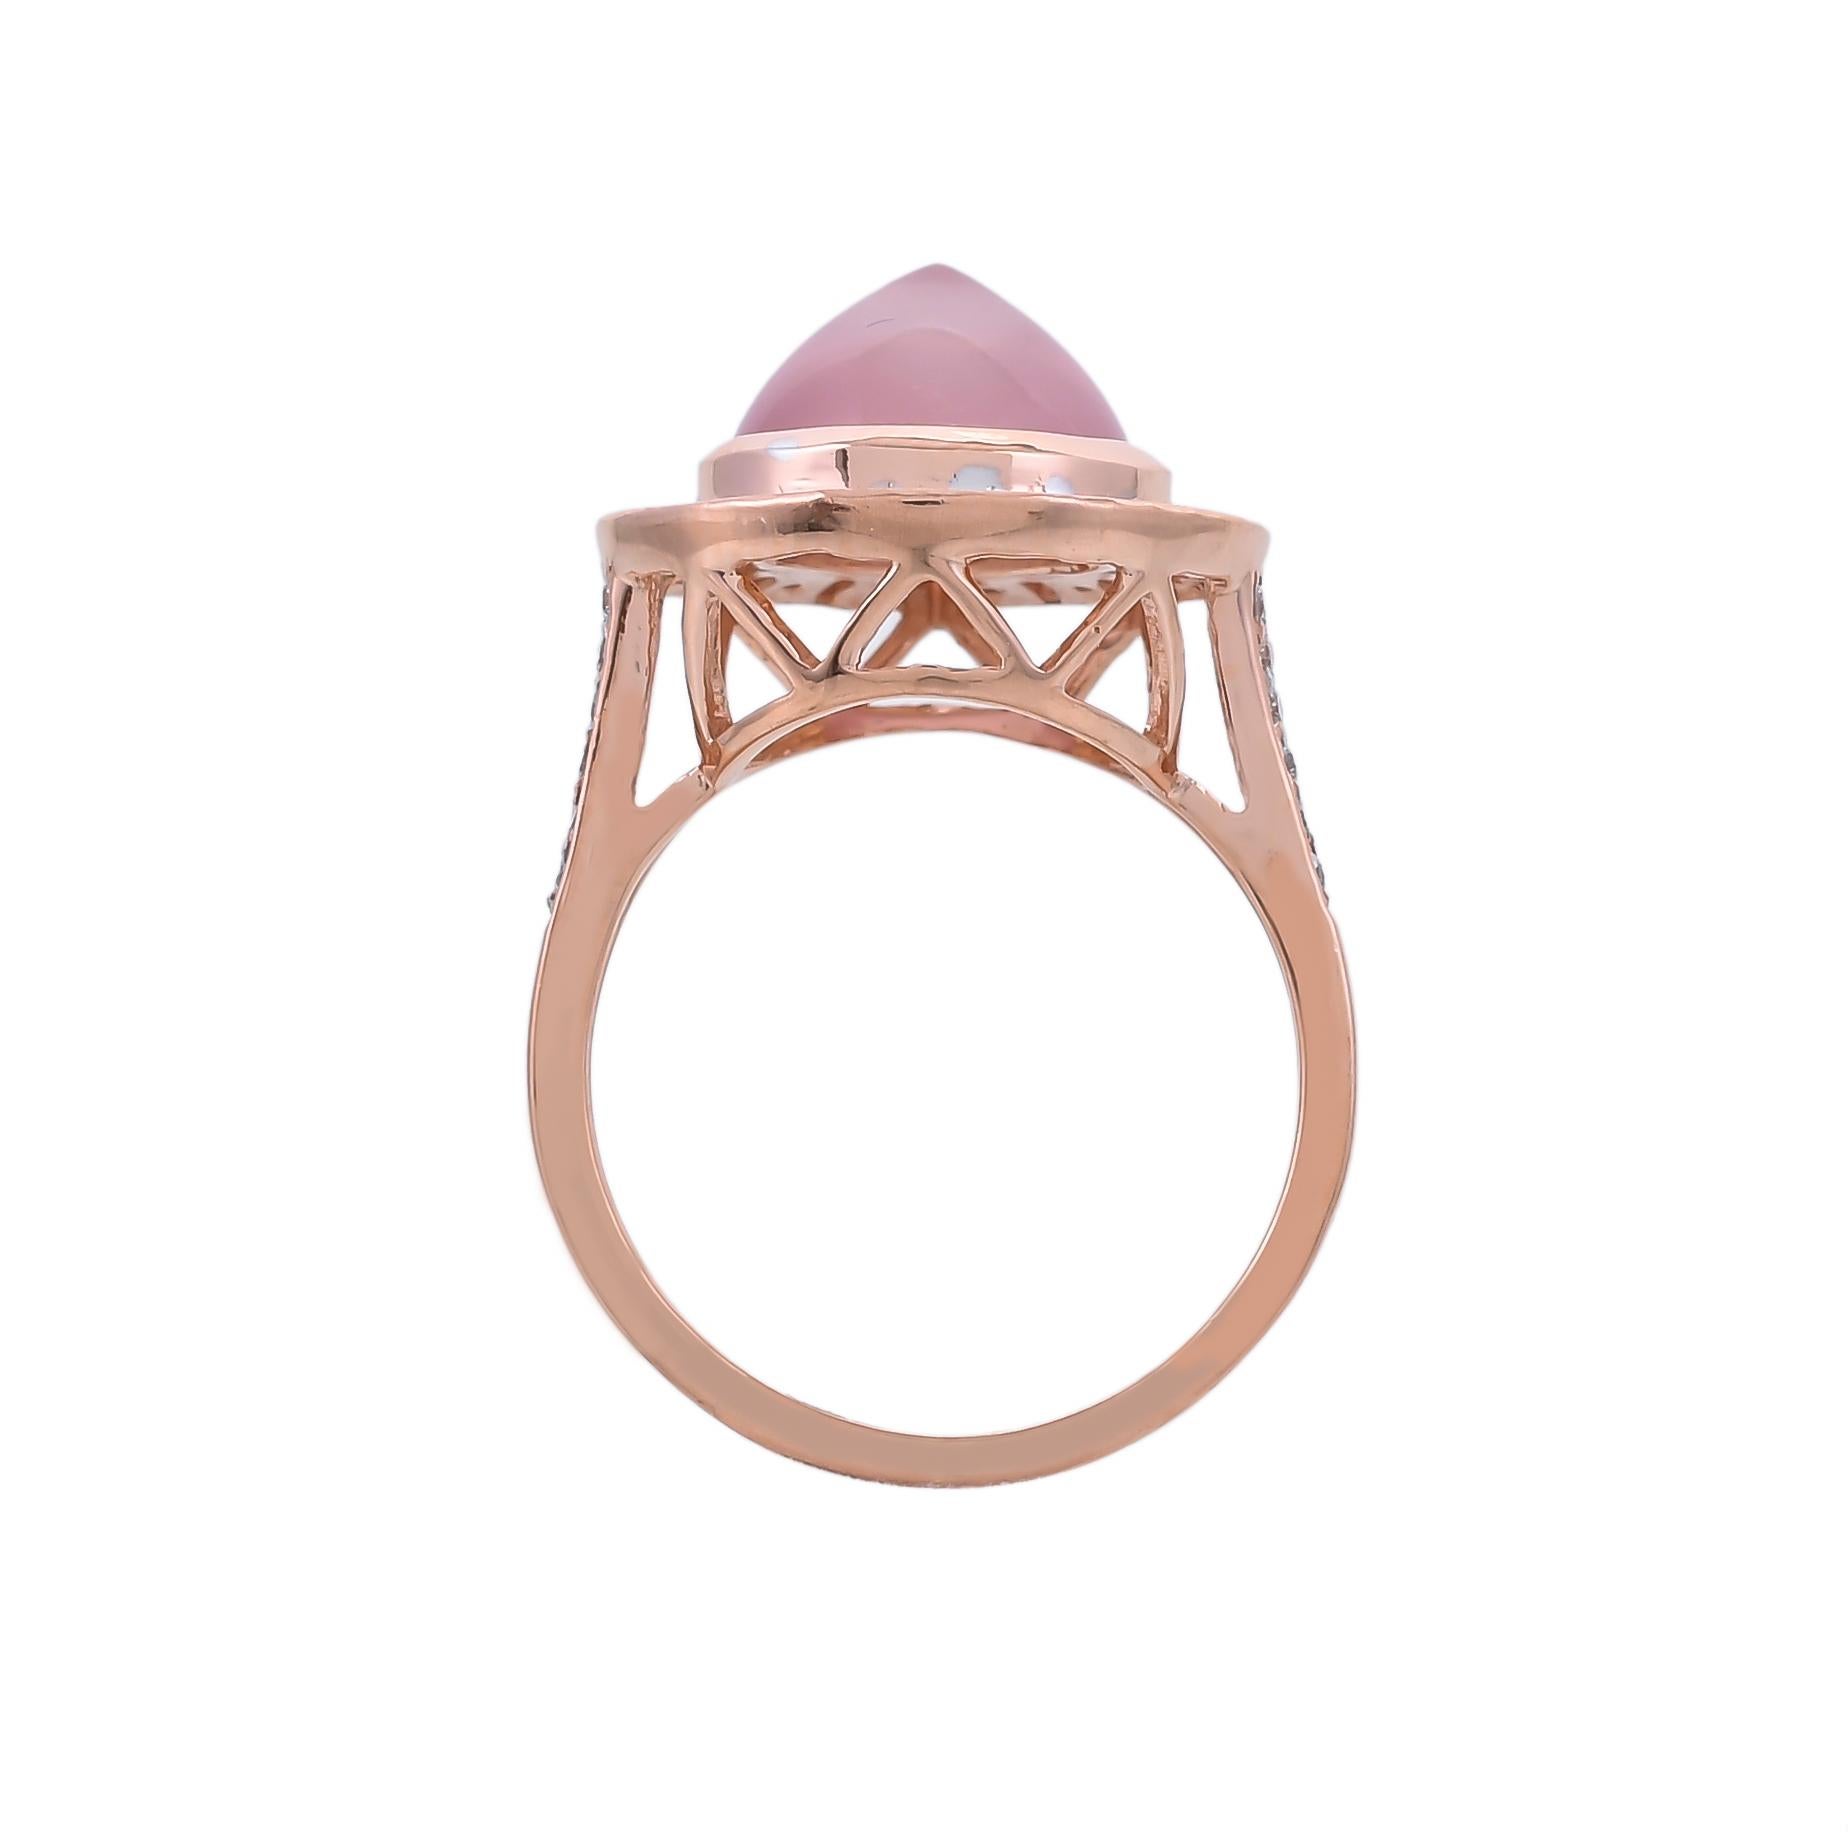 This 18 karats classic rose gold ring from the collection Bon Bon is set meticulously with 0.29 carats diamonds and 7.24 carats rose quartz.
Playful yet chic this ring is an answer to spice up your everyday style.
Art of gifting: the Jewel is